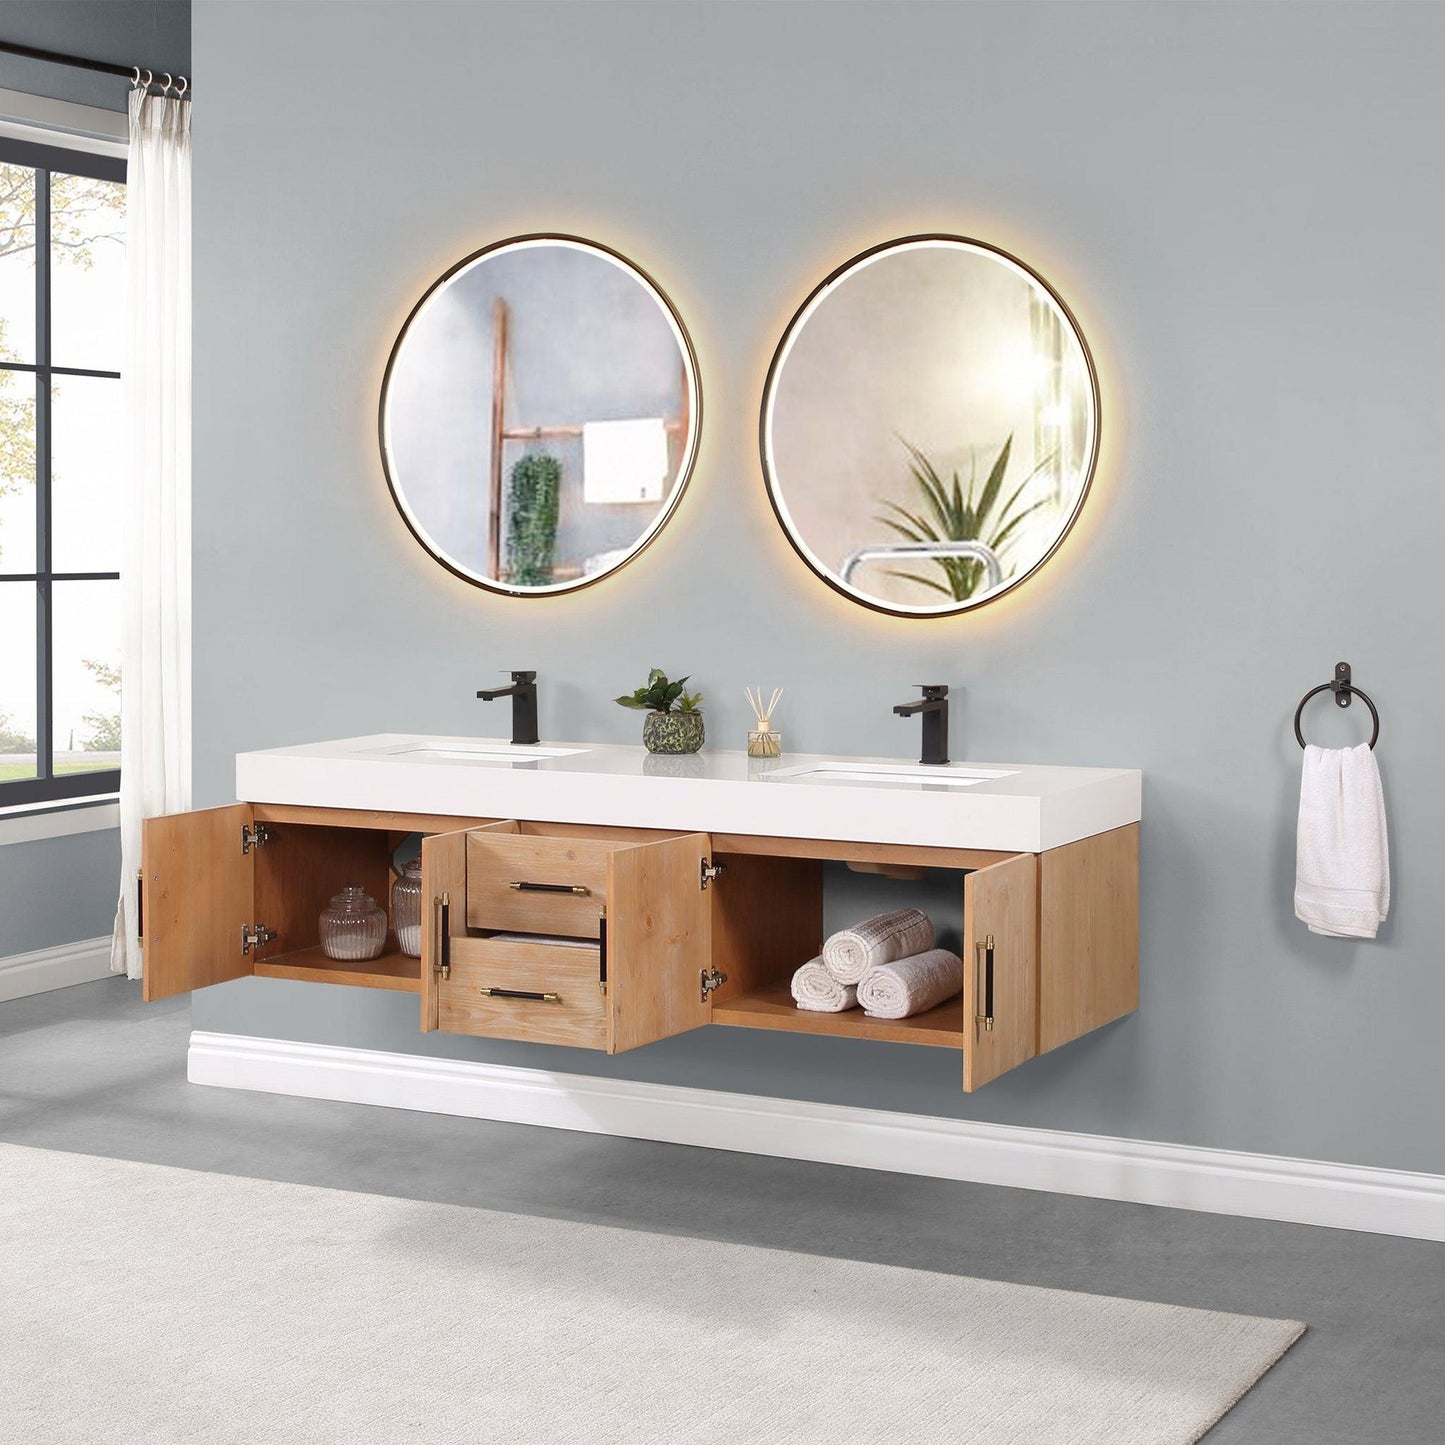 Altair Corchia 72" Light Brown Wall-Mounted Double Bathroom Vanity Set With Mirror, White Composite Stone Top, Two Rectangular Undermount Ceramic Sinks, and Overflow